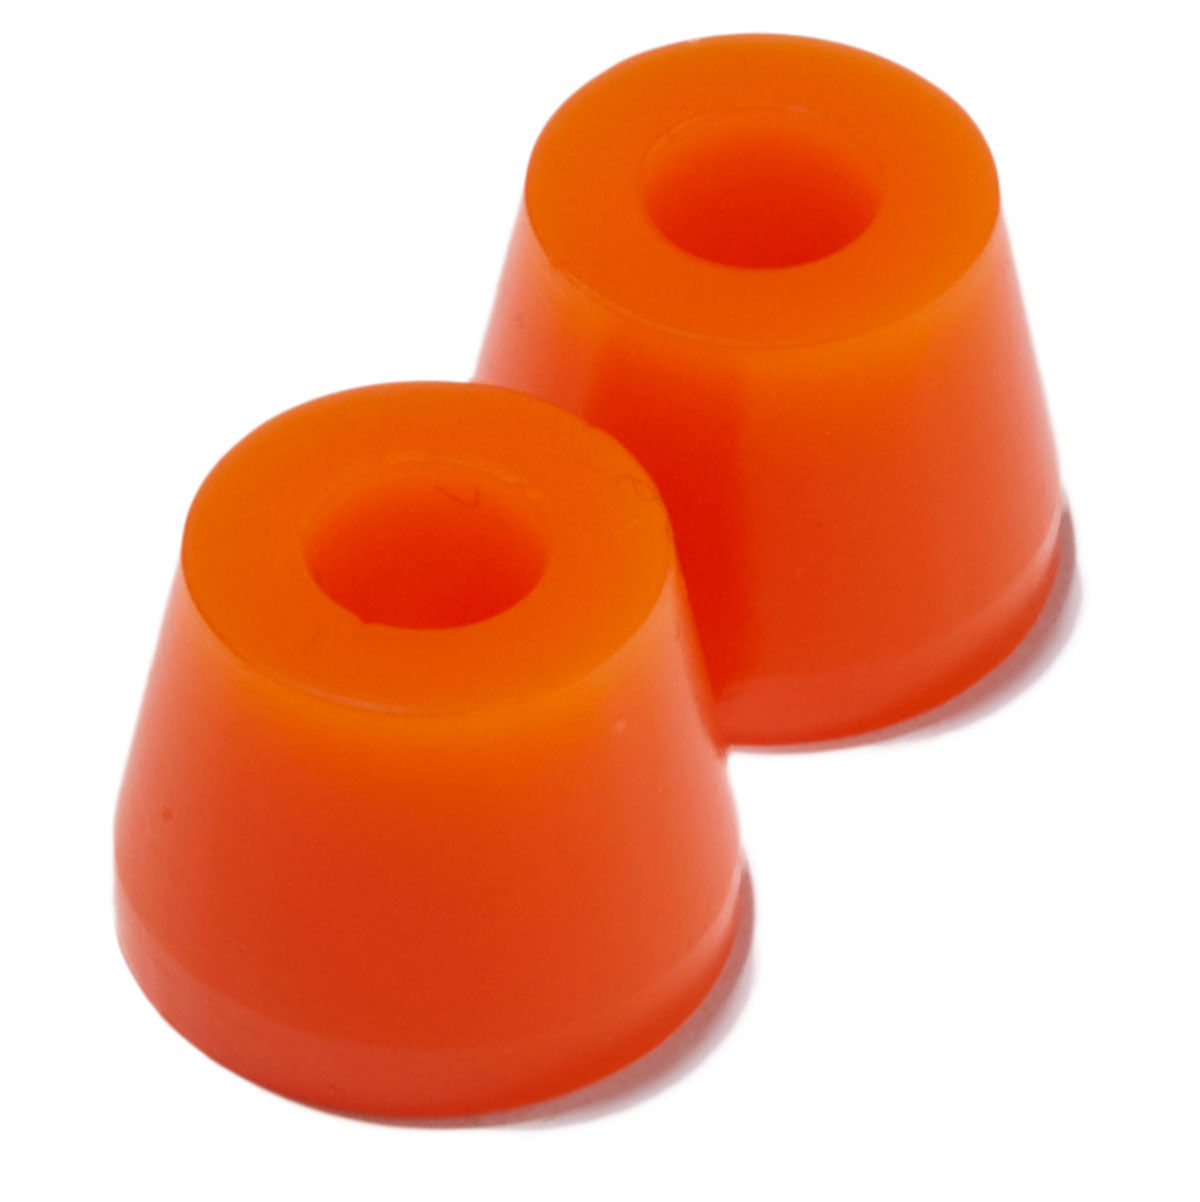 RipTide Tall Cone Bushings - APS 80a image 1